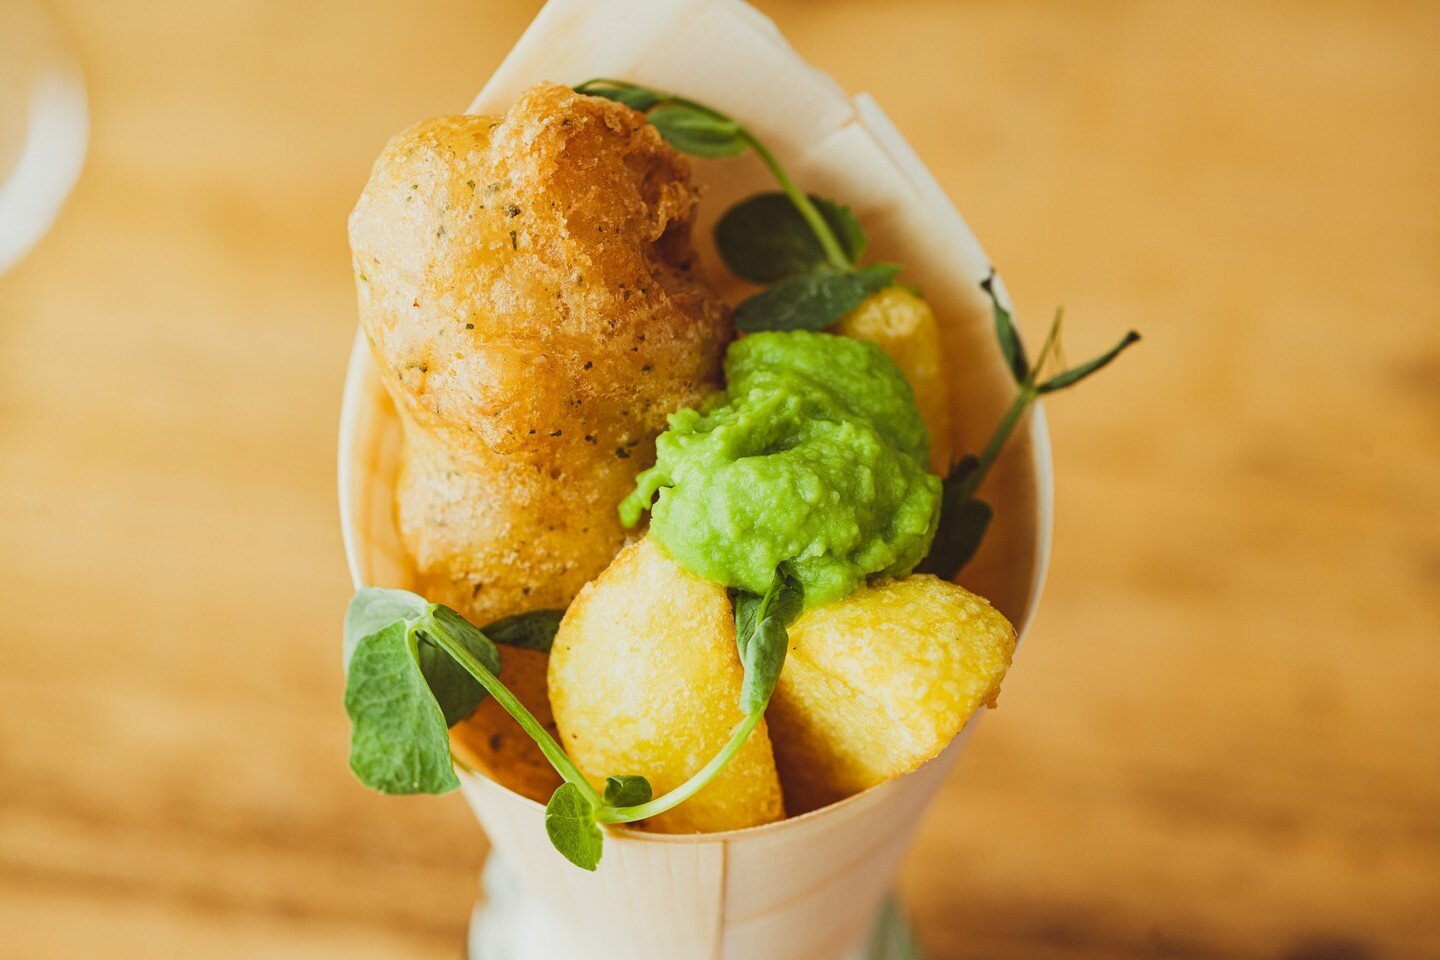 Fish and chips originated in the UK in the mid-19th century. Fried fish was a common dish for the working class, and adding chips made it a hearty meal.